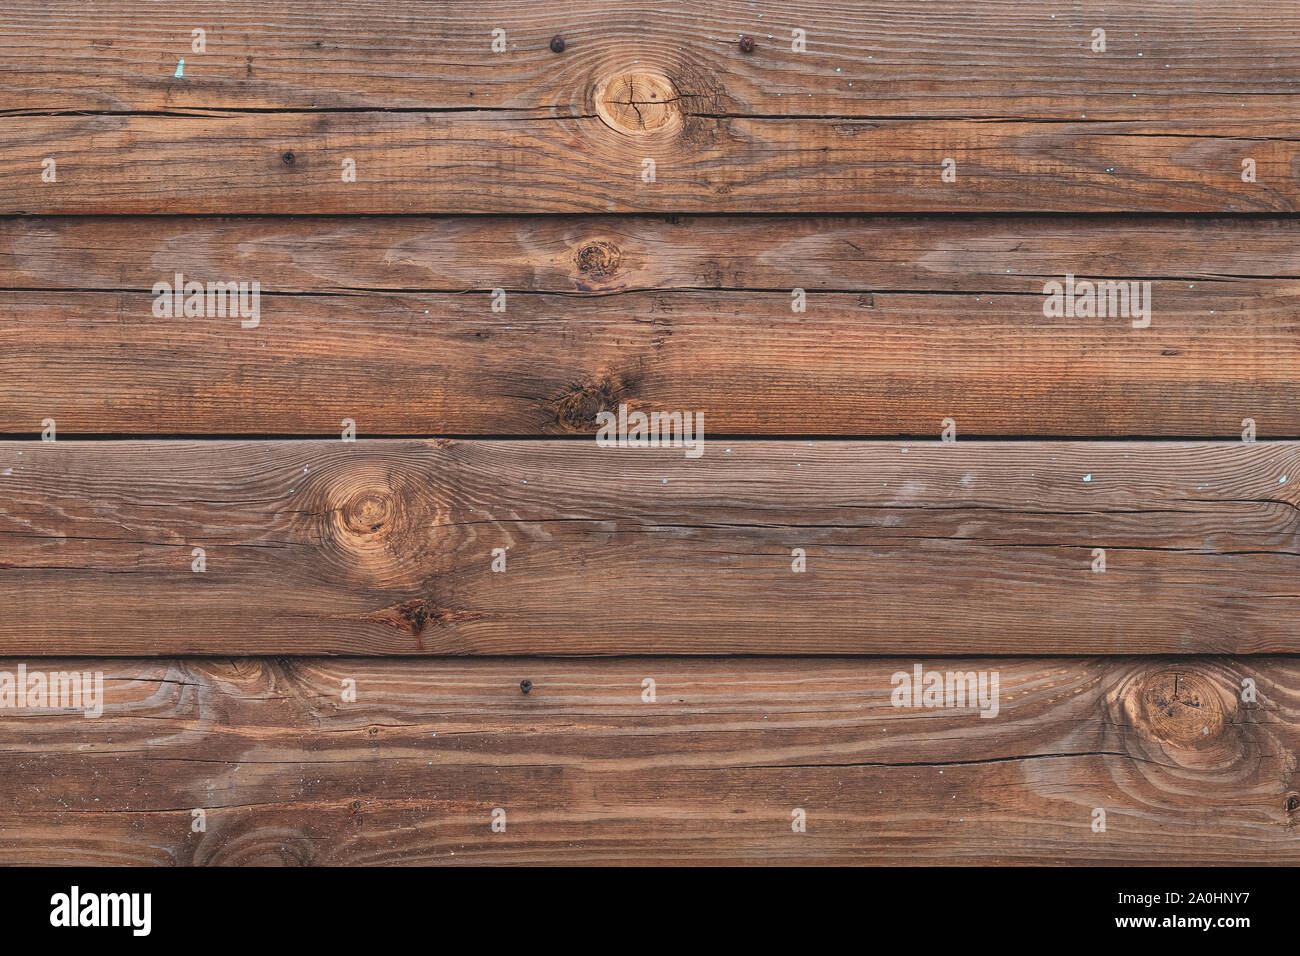 Brown wooden boards background. Shabby wood texture, surface. Vintage timber fence, desk surface. Natural color. Old wood planks pattern. Stock Photo